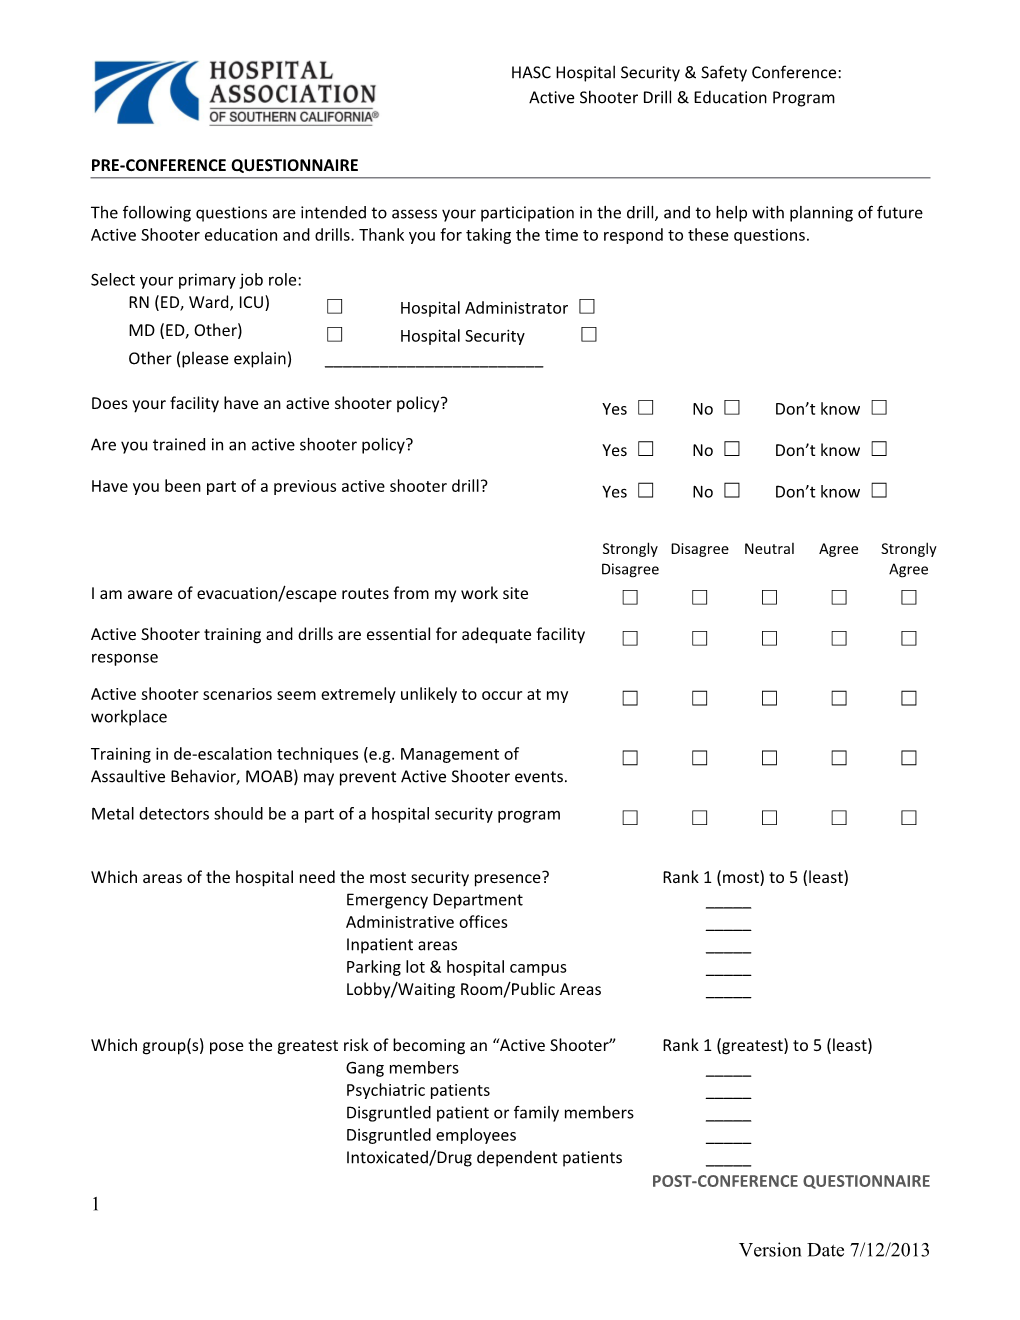 Post-Conference Questionnaire